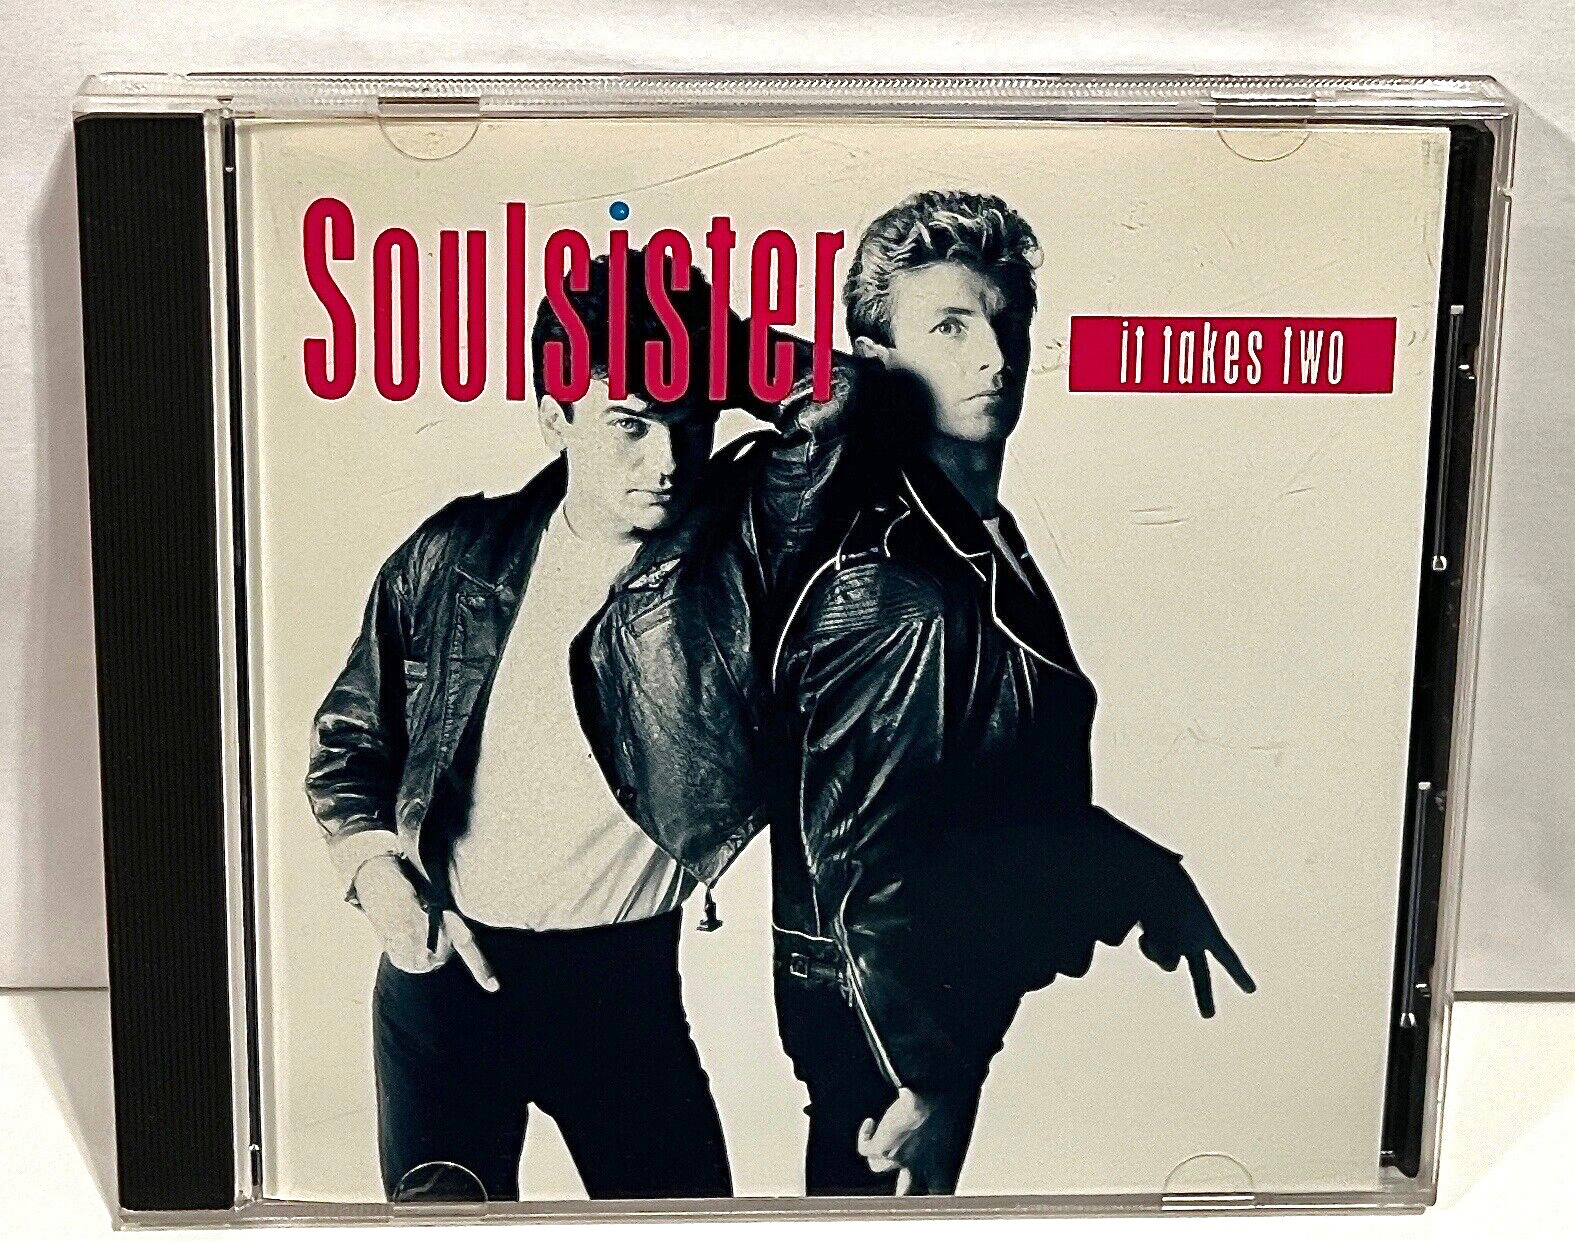 SOUL SISTER IT TAKES TWO CD 1988 EMI BELGIUM MADE IN USA 80s R&B SOUL POP VOCAL